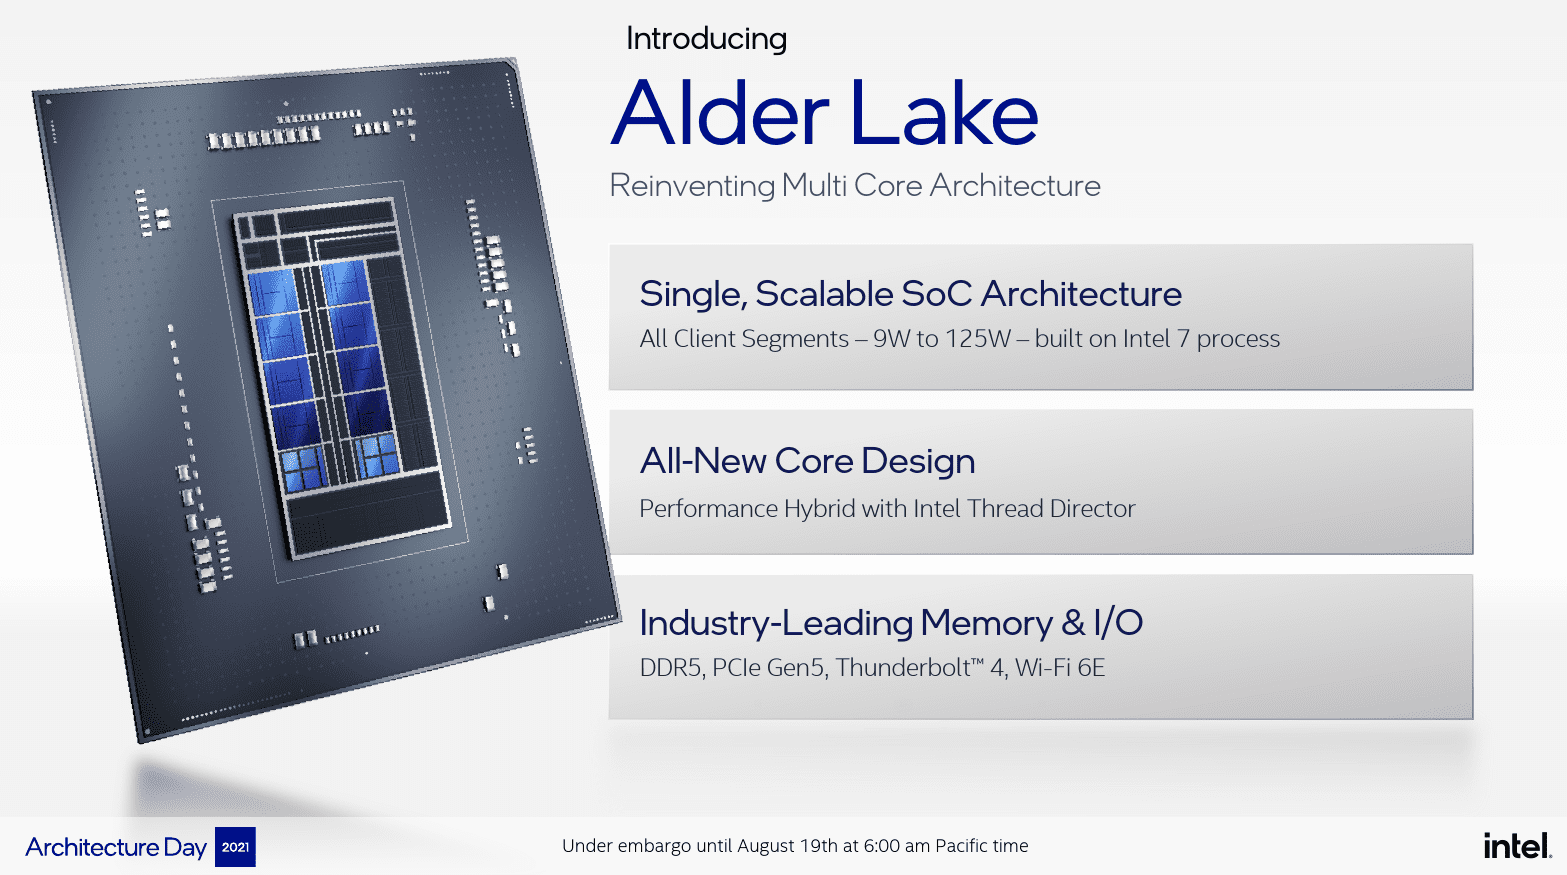 Alder Lake design and features, including Intel 7nm node, Hybrid Architecture and Latest I/O.